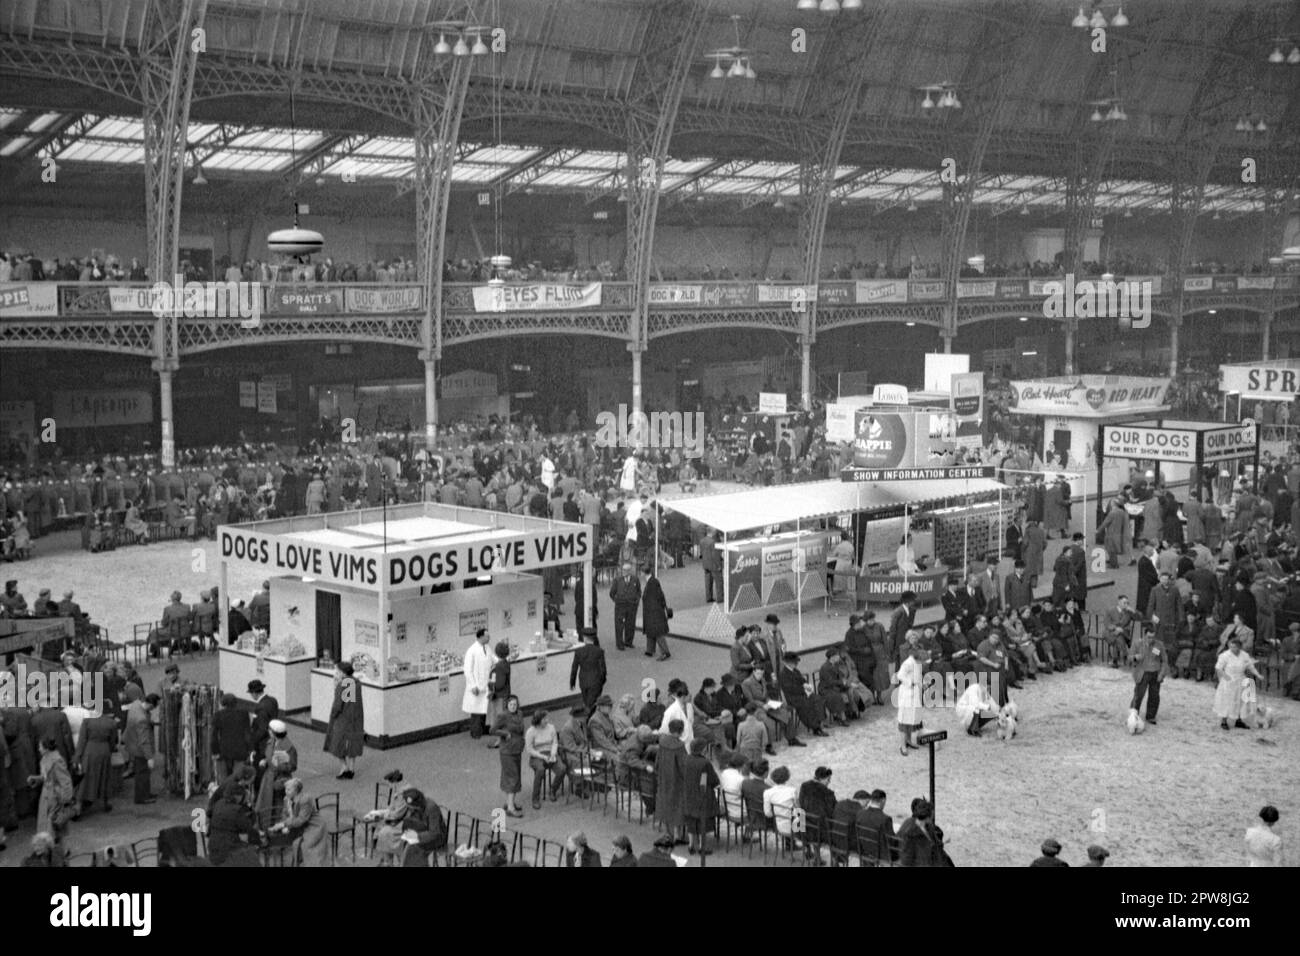 Crufts dog show in main hall at Olympia Exhibition Centre, London, England, UK c. 1950. Crufts is an annual international dog show, first held in 1891. Dogs are being judged (right). Trade stands and banners promote dog-related goods from companies such as Vims, Chappie, Spratts and Jeyes Fluid. Organised by The Kennel Club, it is the largest show in the world. It is a championship conformation show for dogs, a large trade show of goods and services, plus competitions. The 1948 show was the first to be held at this venue. This is from an old amateur 35mm negative – a vintage 1940s/50s photo. Stock Photo